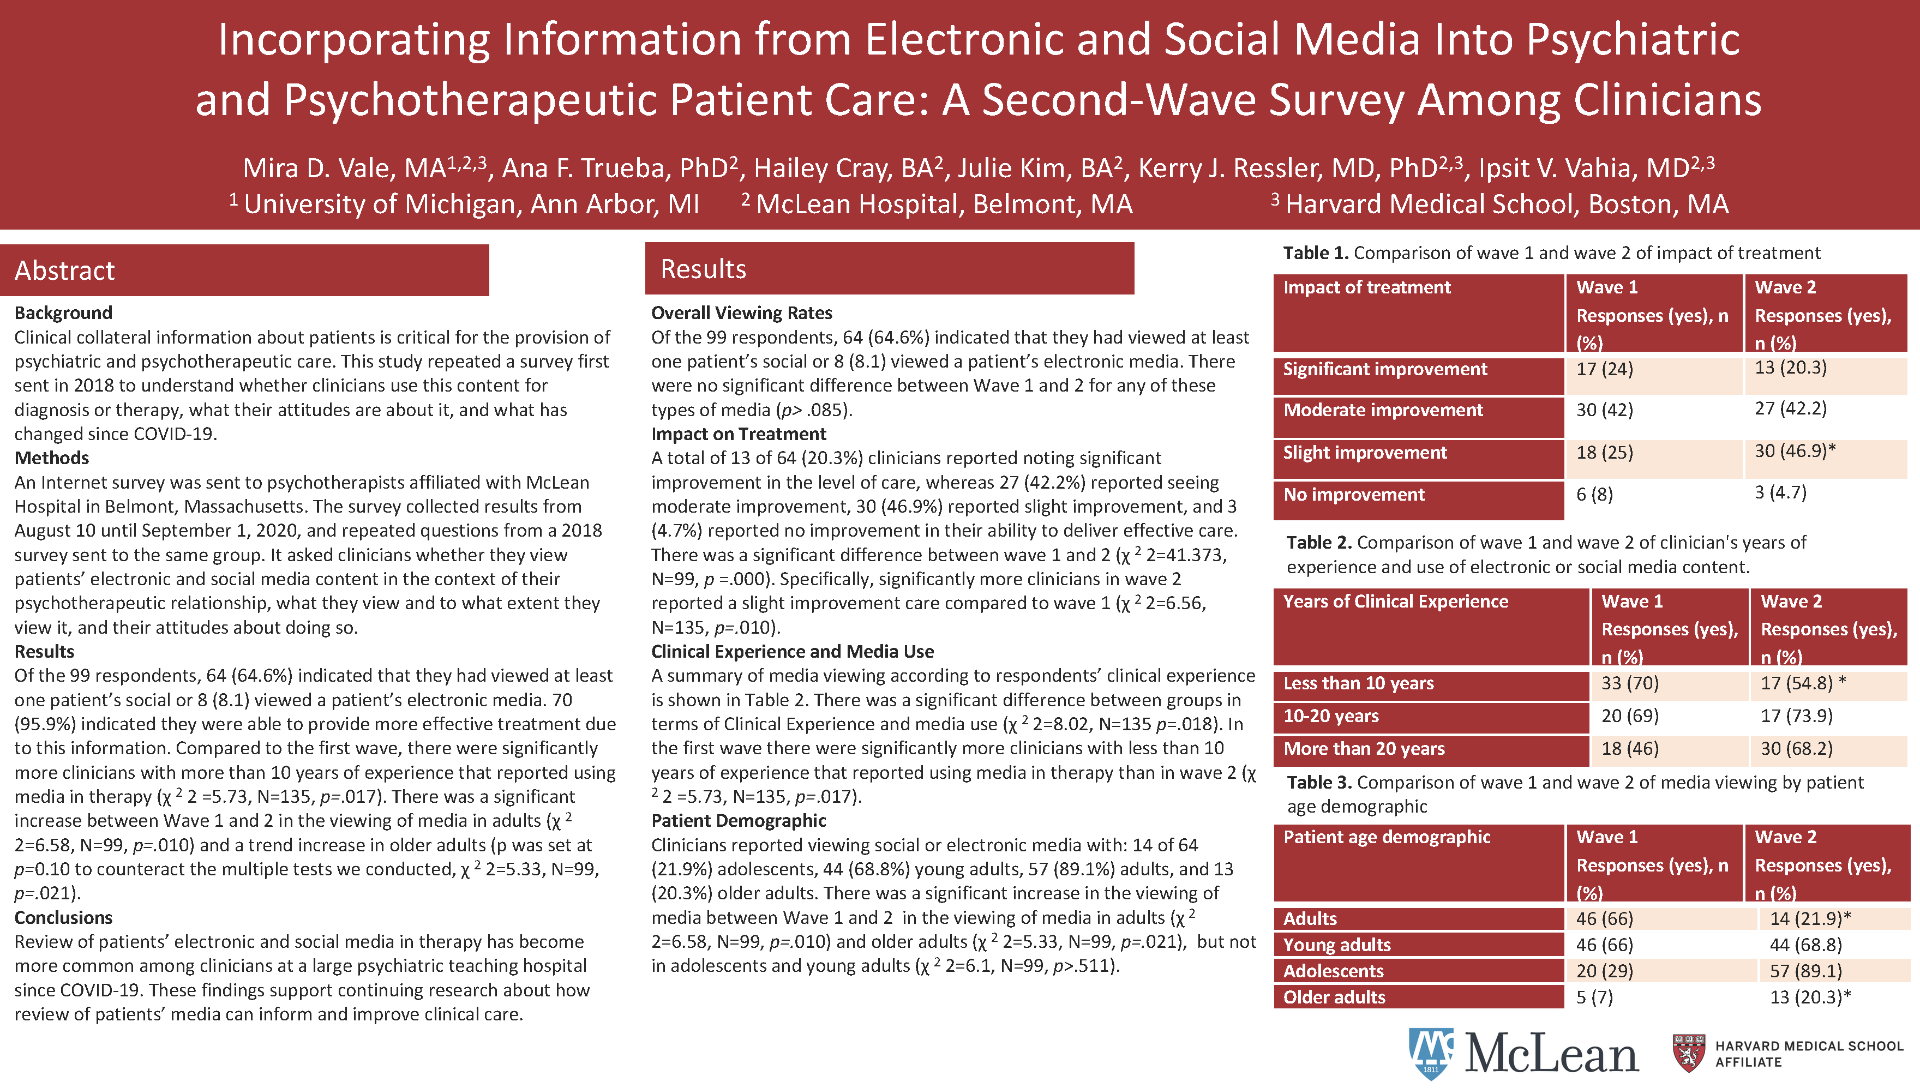 Incorporating Information from Electronic and Social Media Into Psychiatric and Psychotherapeutic Patient Care: A Second-Wave Survey Among Clinicians